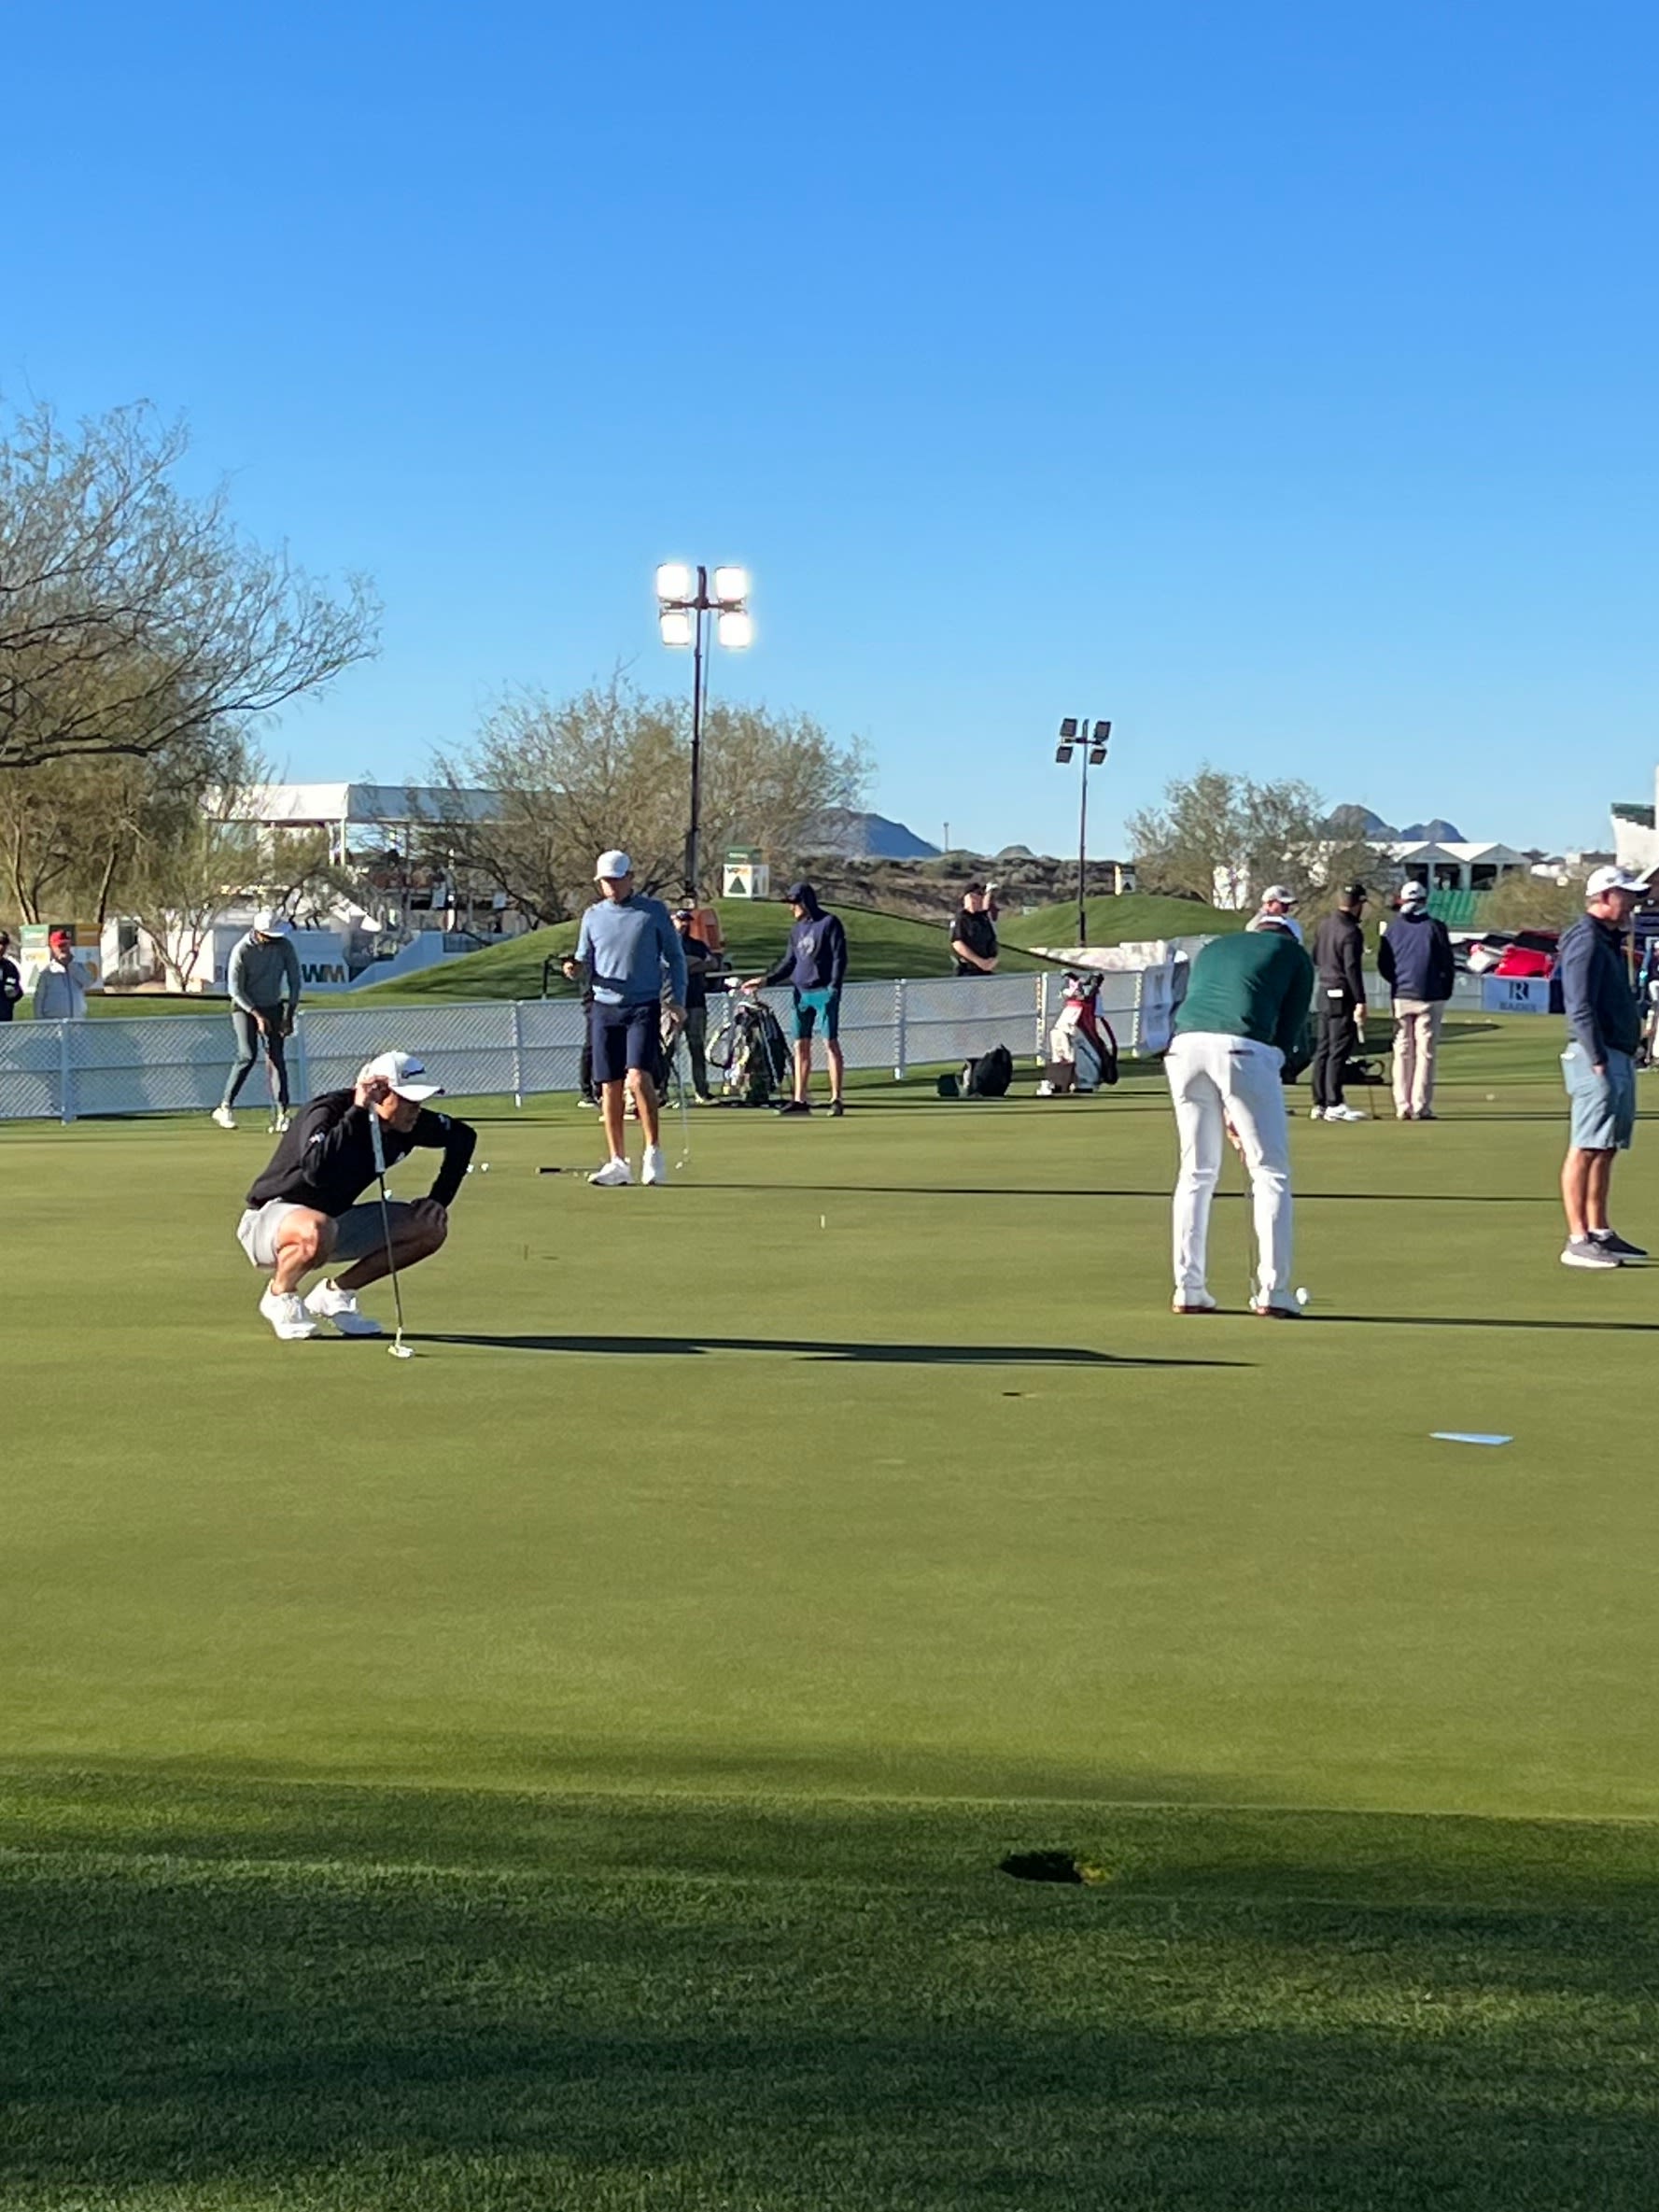 Collin Morikawa practicing his putting at TPC Scottsdale prior to the WM Phoenix Open.